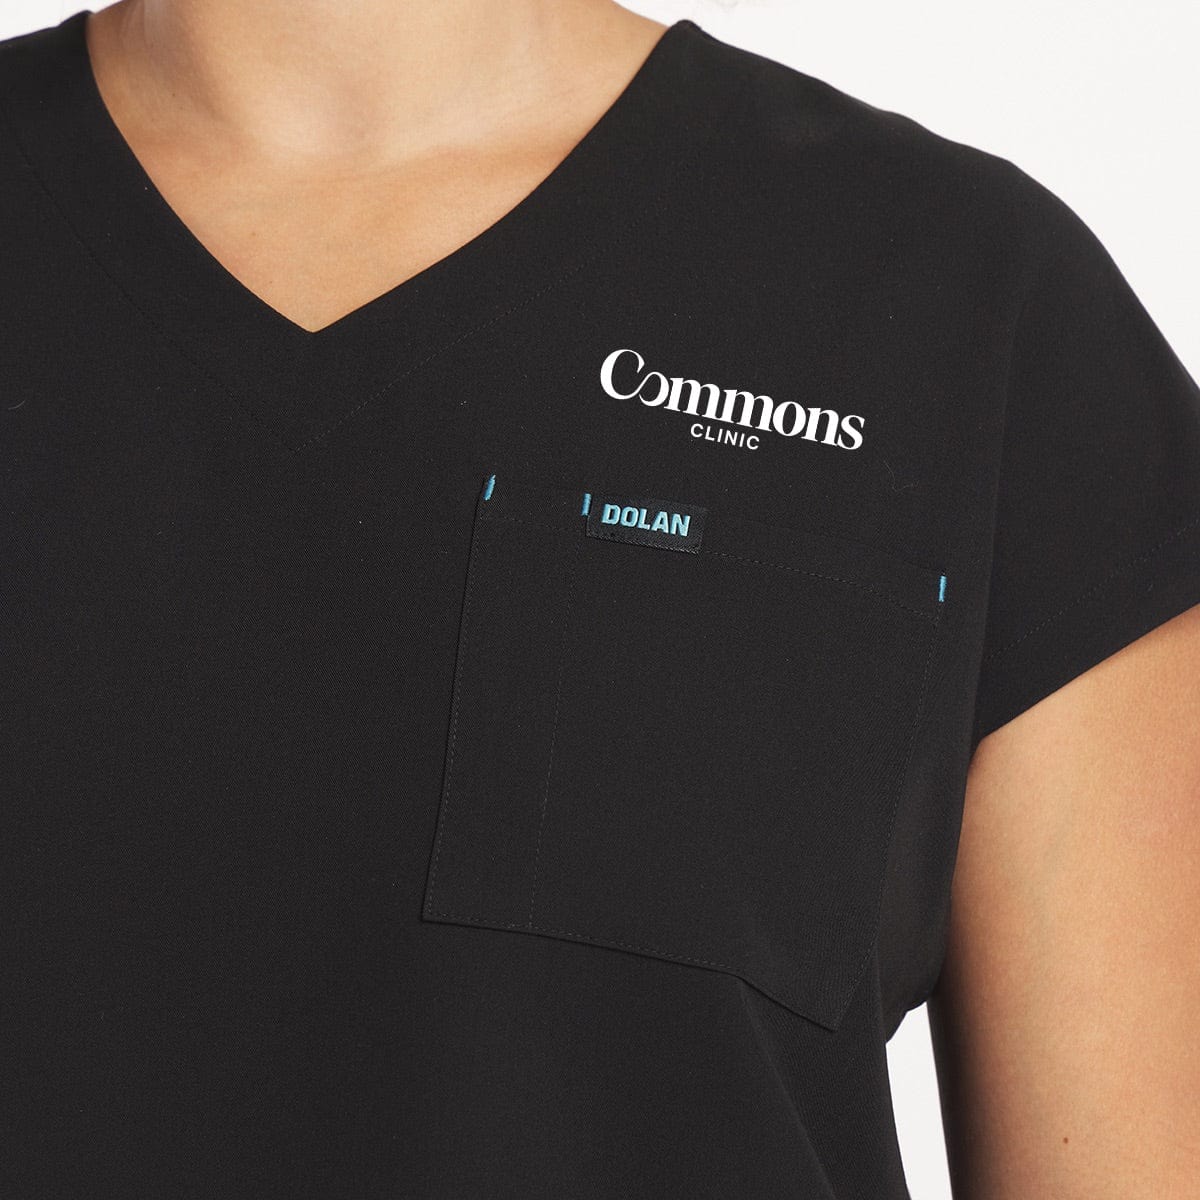 Commons Clinic Logo Embroidery